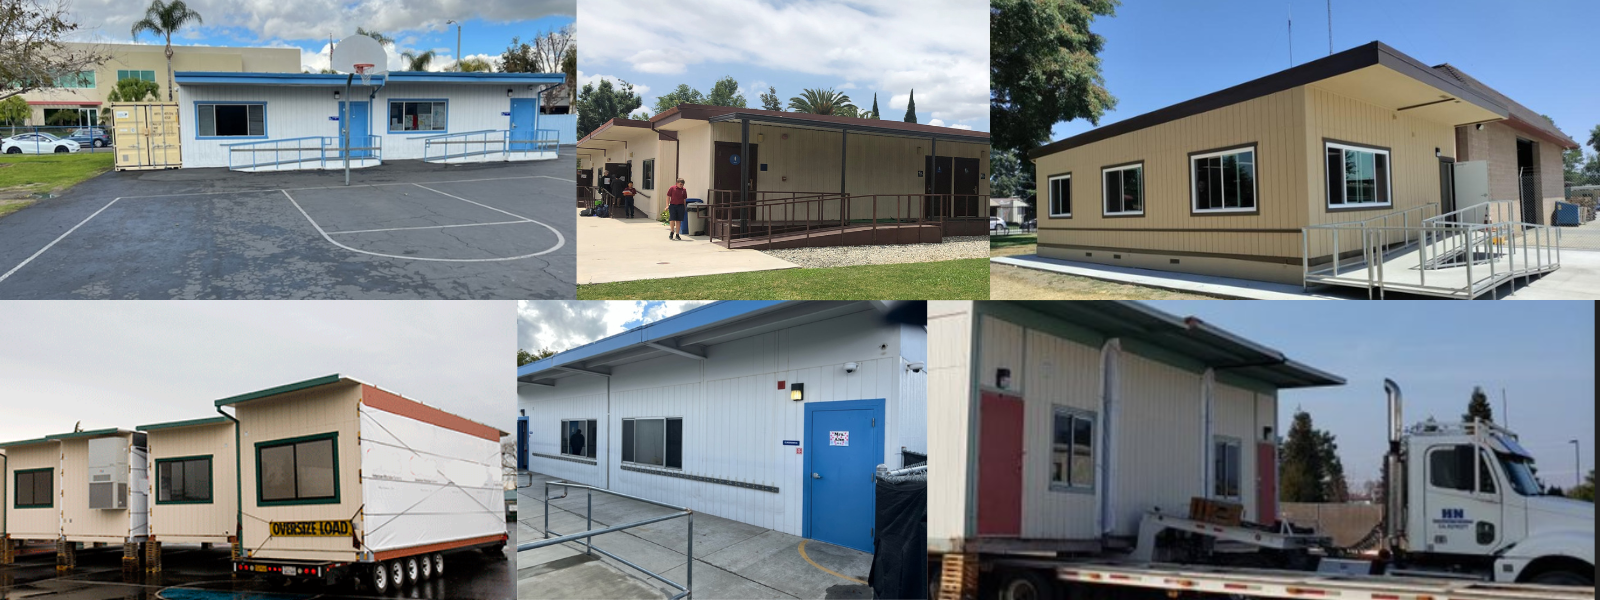 You can find used Portable Classrooms in California for below market prices